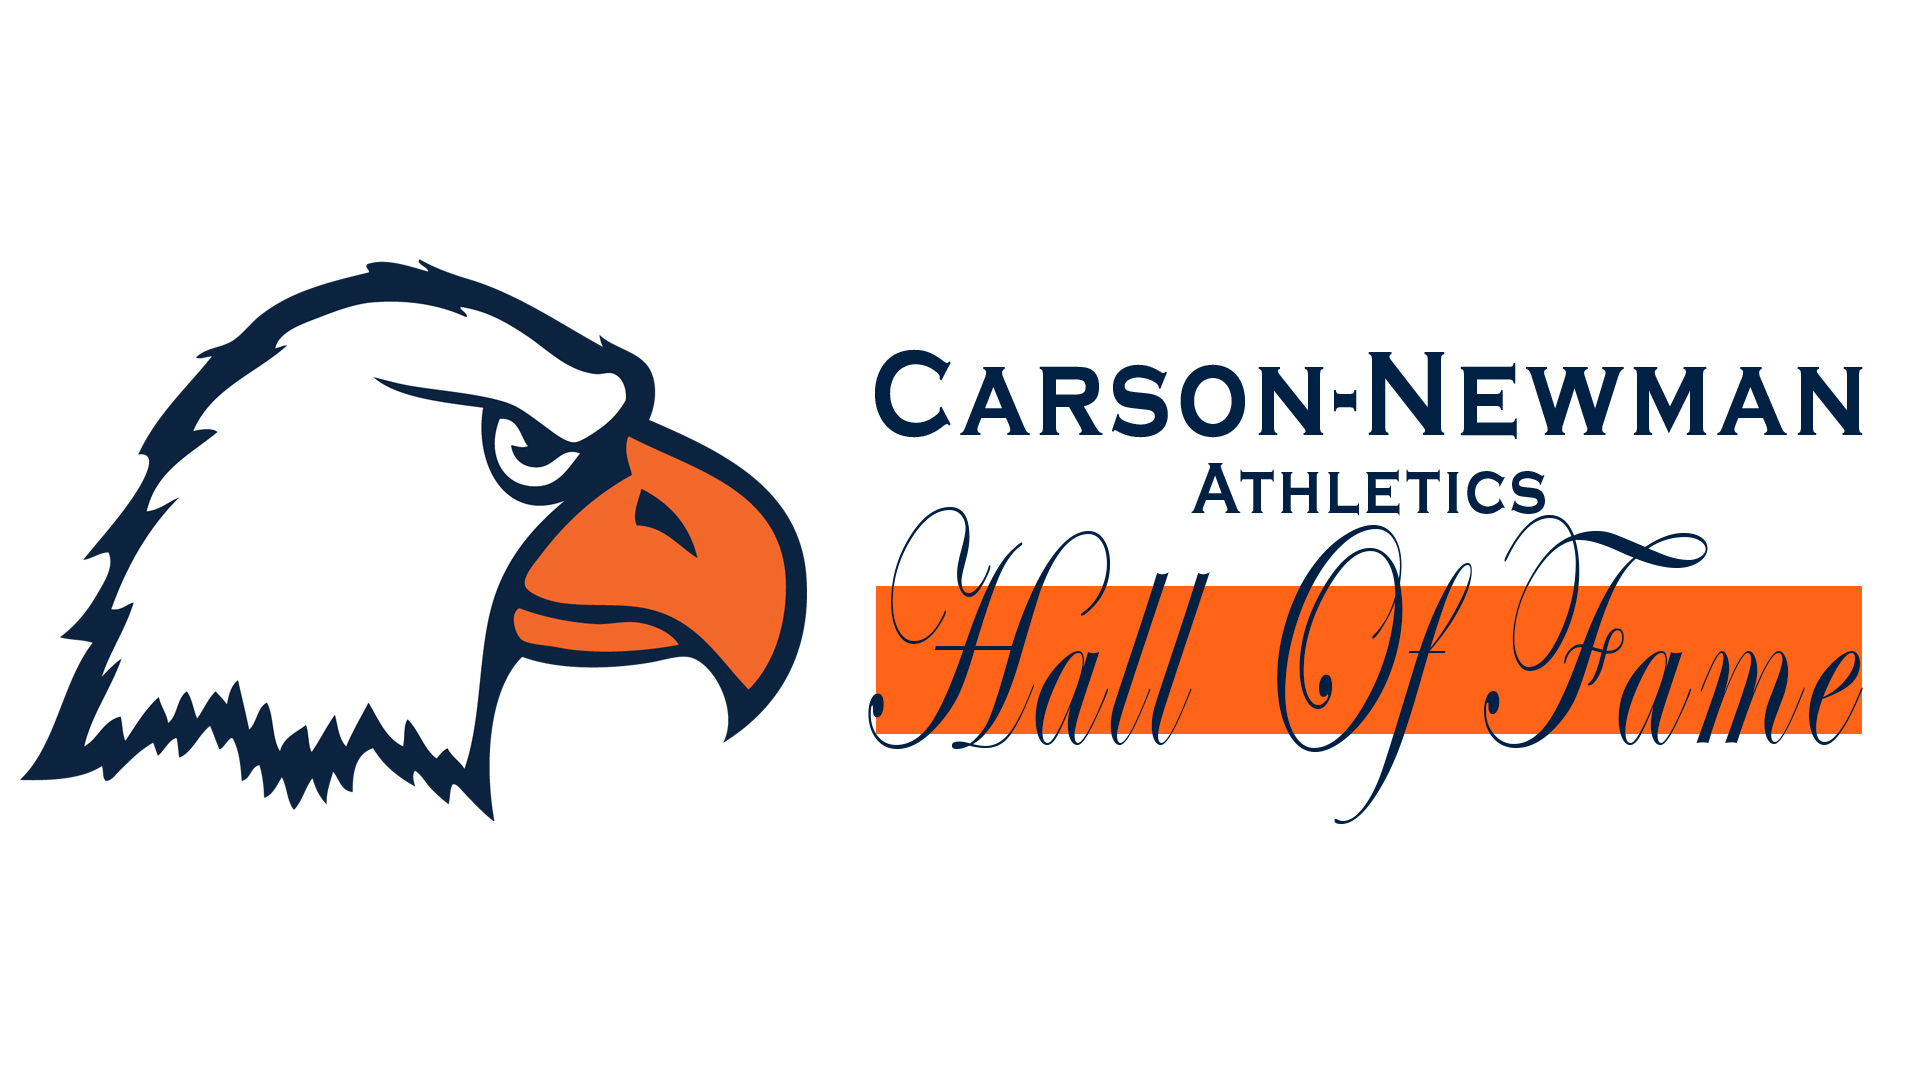 Ballot released for 2022-23 Carson-Newman Athletics Hall of Fame class